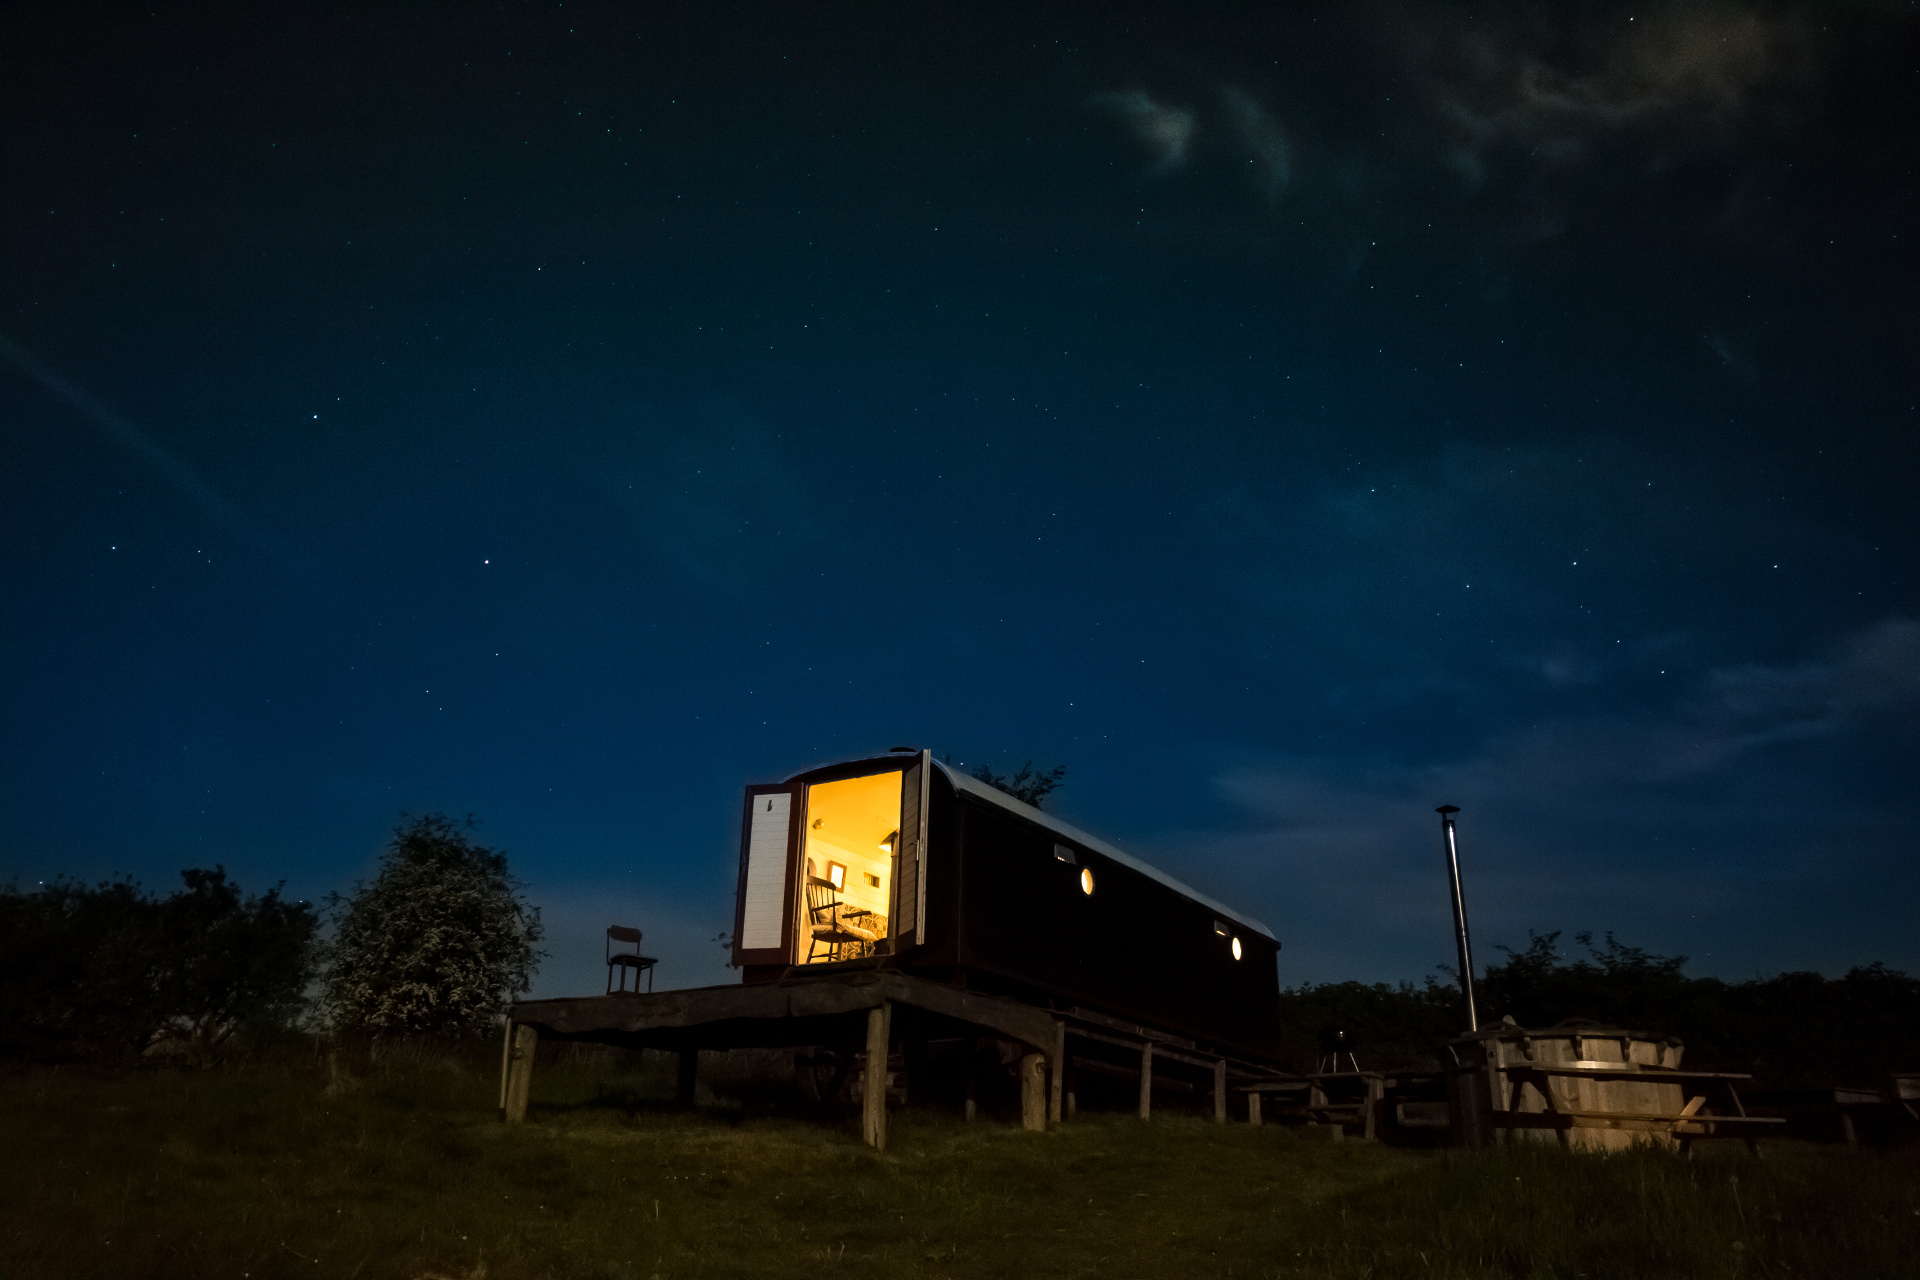 Herefordshire Hideaways Stargazer's Wagon Glamping Rustic Wagon Quirky Accommodation Night Photography Stars Hot Tub Astrophotography Top 25 Things to Do in Herefordshire